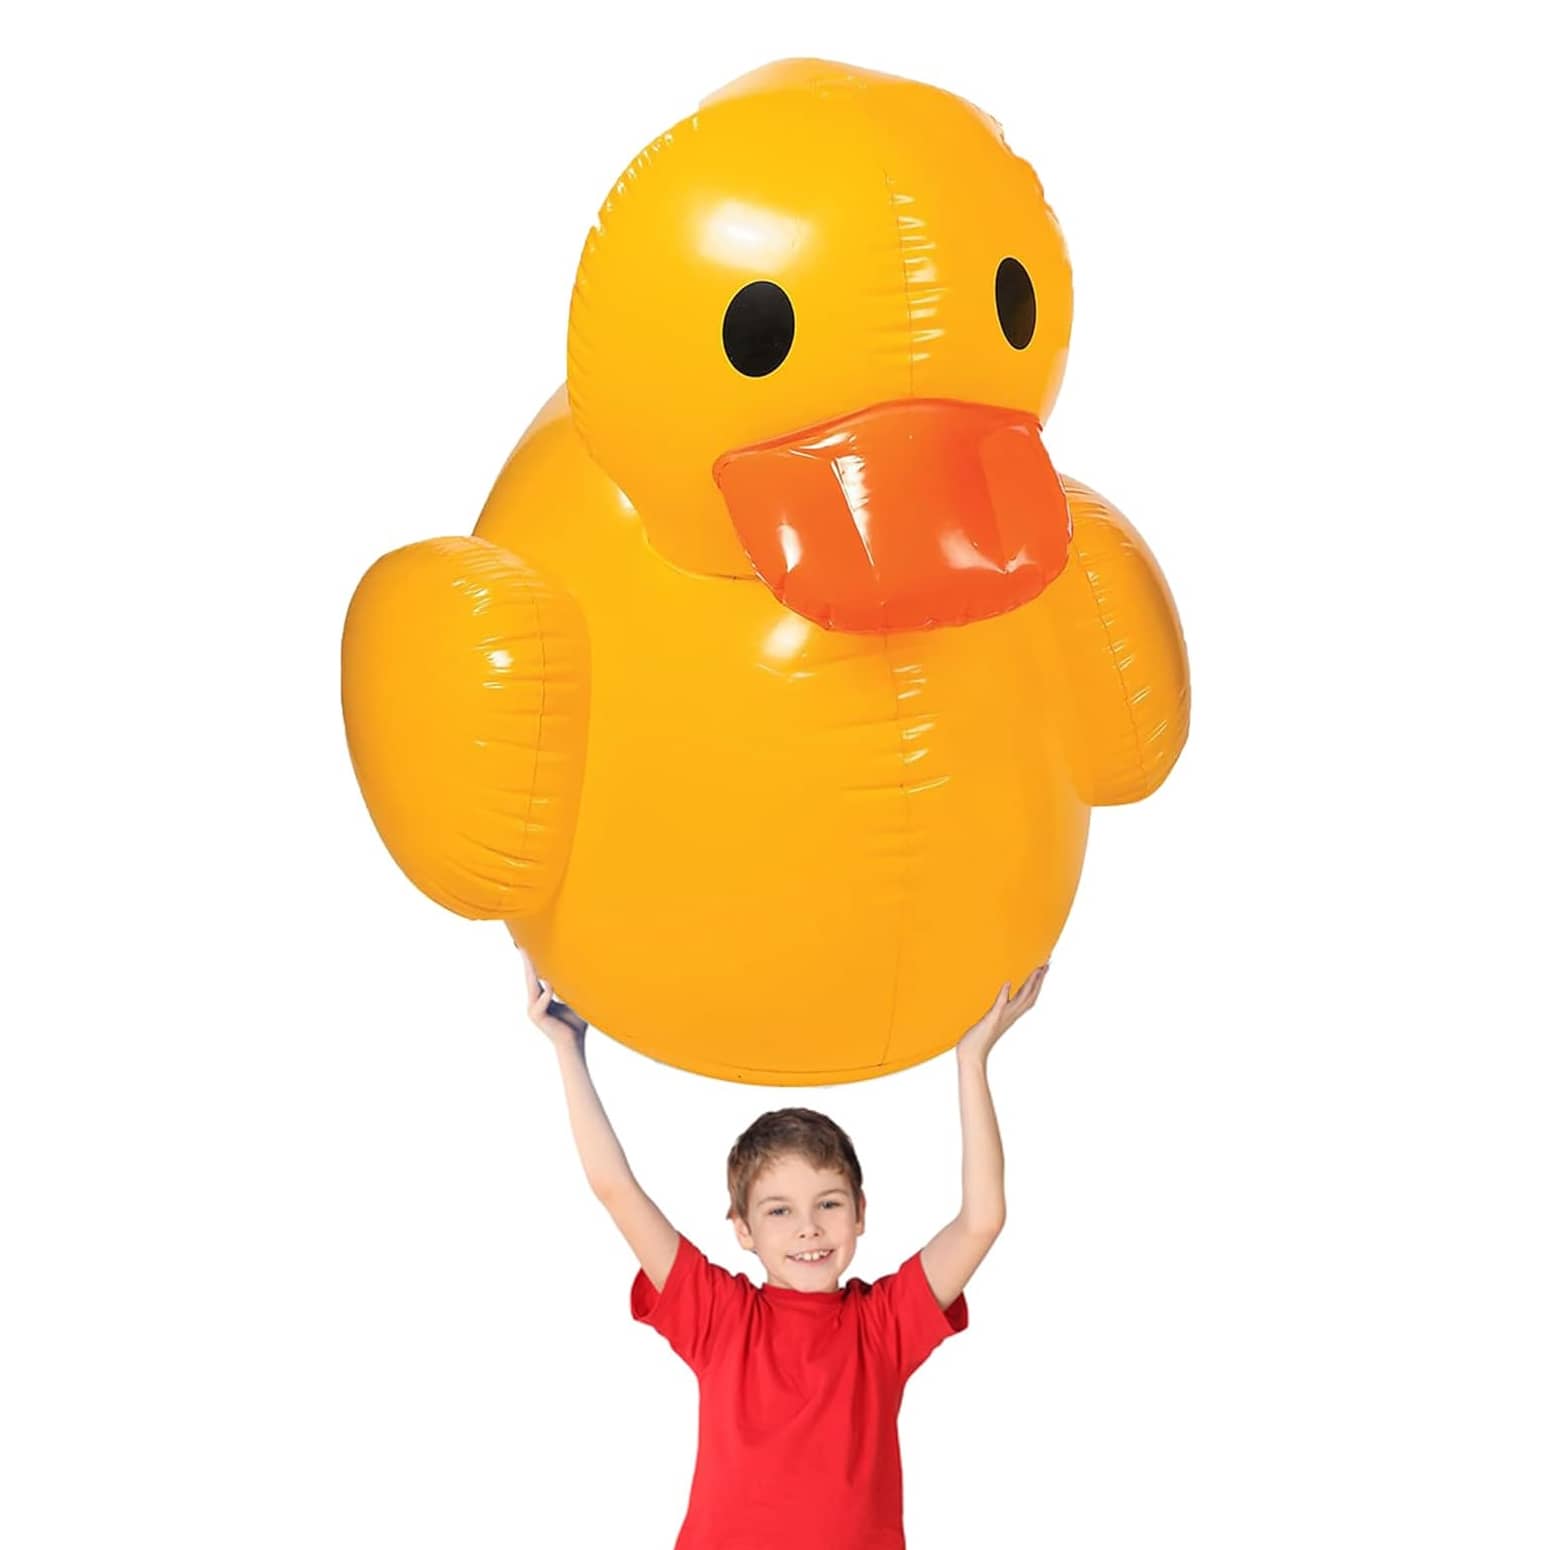 Gigantic Inflatable Rubber Duck - 4 Feet Tall!